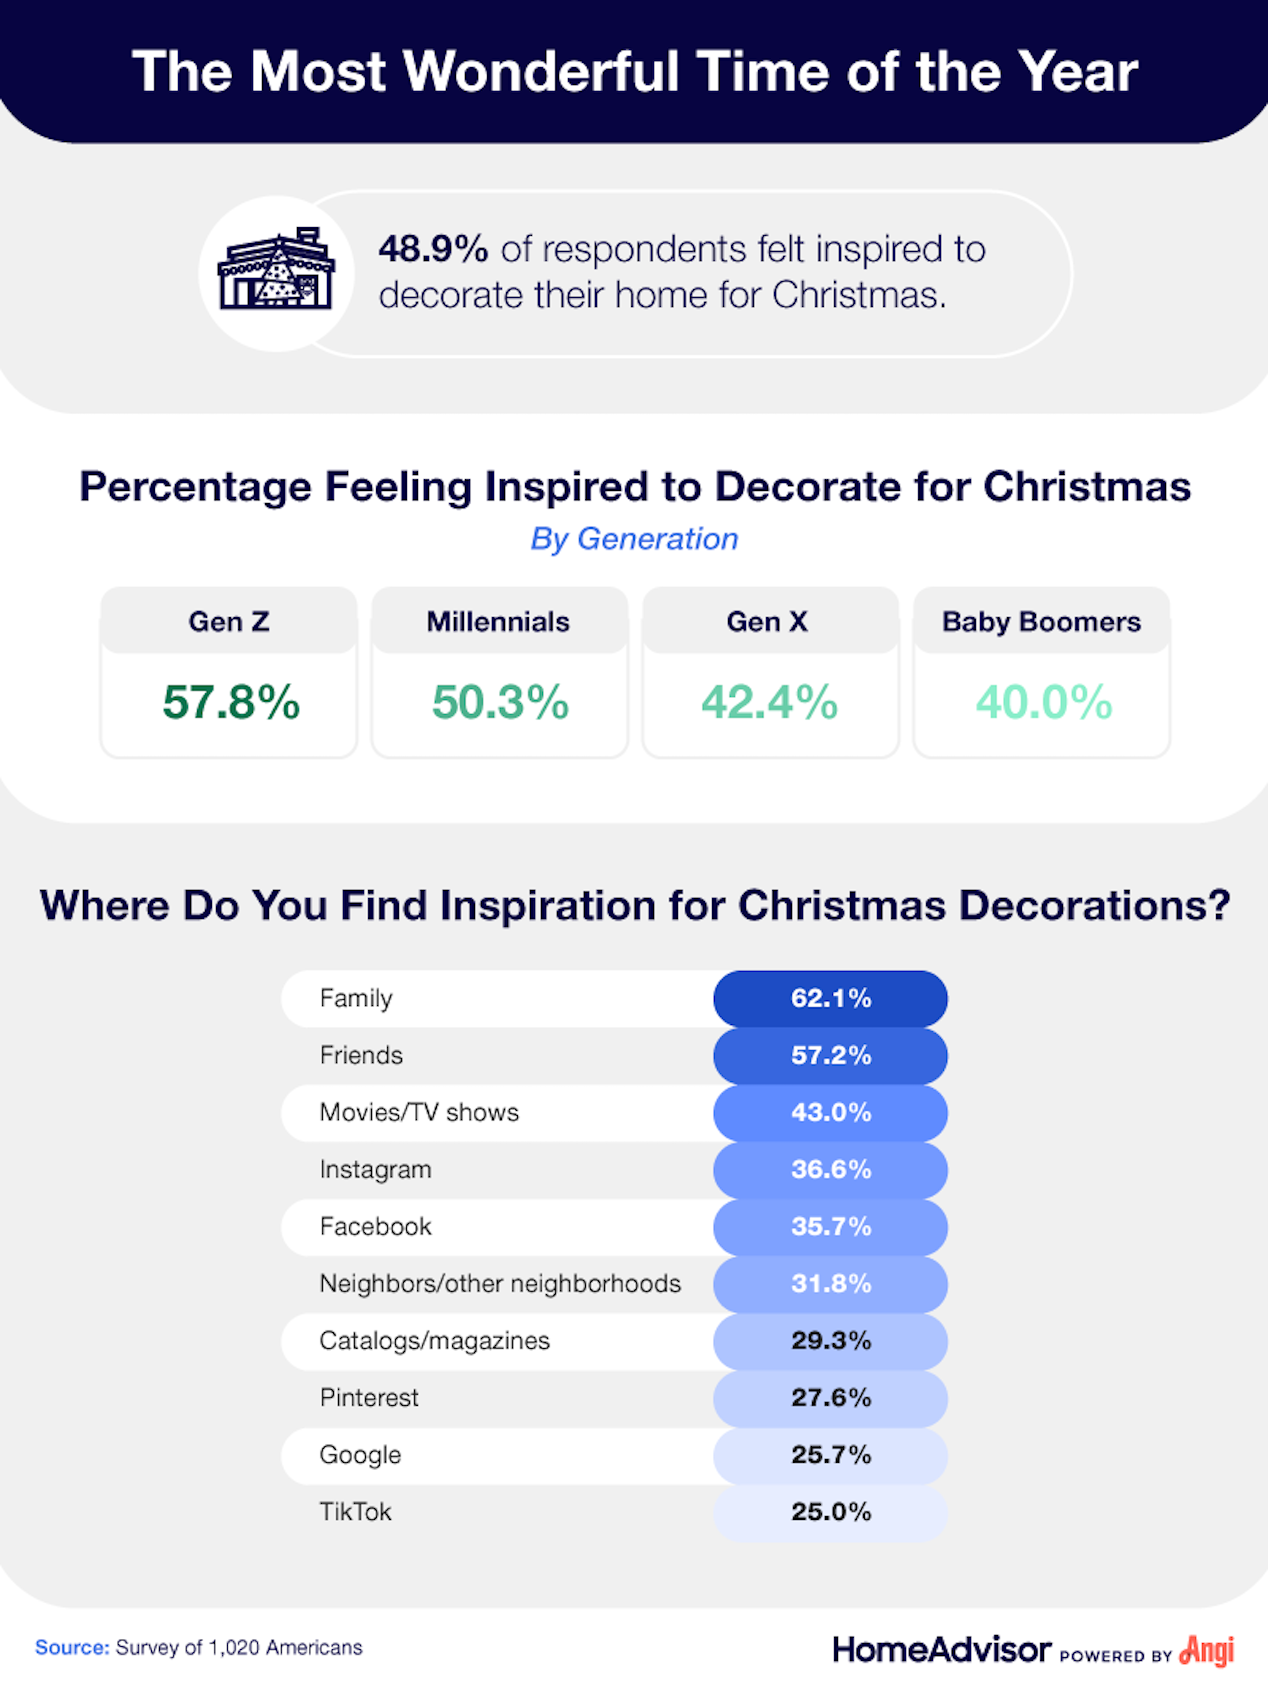 An infographic describing how inspired people felt to decorate for Christmas 